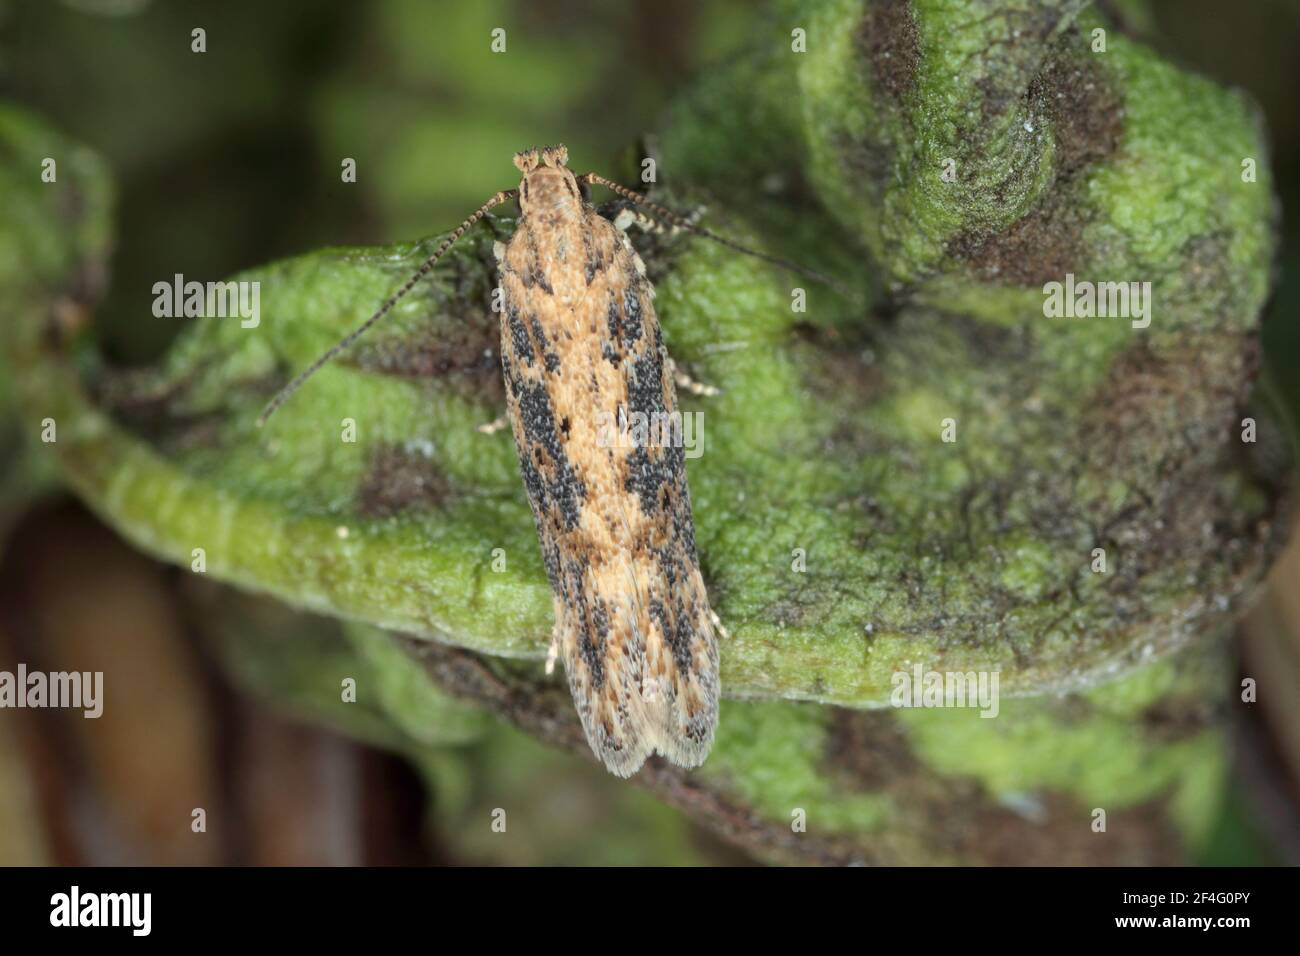 Moth of the beet moth Scrobipalpa ocellatella, is a species in the family Gelechiidae. This is an important pest of sugar beet and other crops. Stock Photo